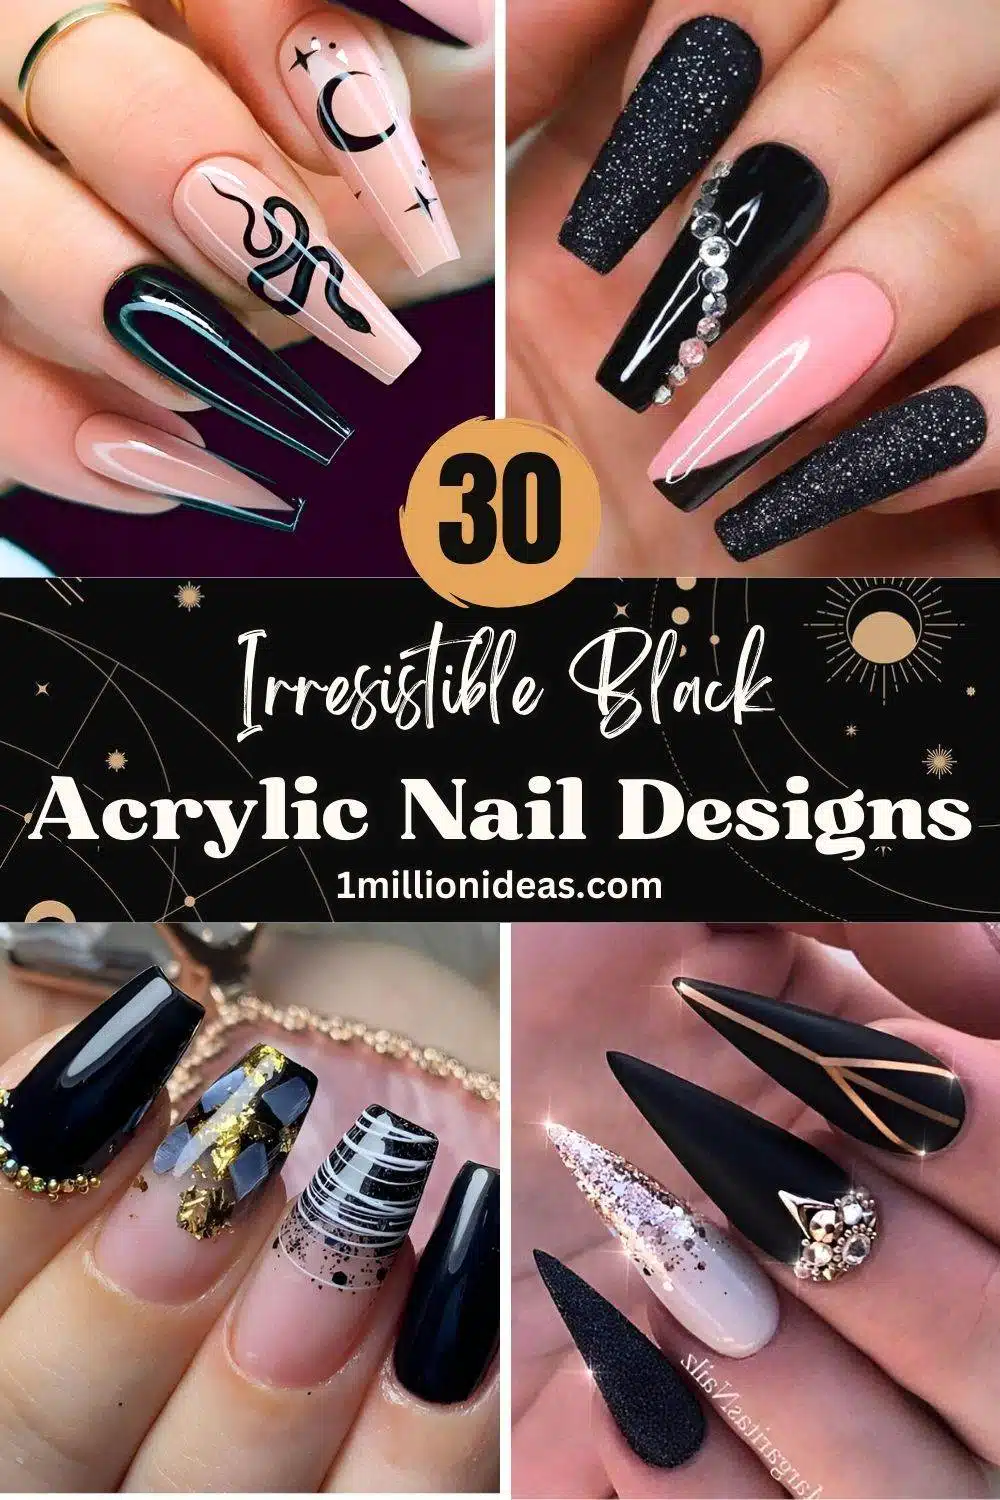 Attention, Beauty Queens: 30 Irresistible Black Acrylic Nail Designs - 191